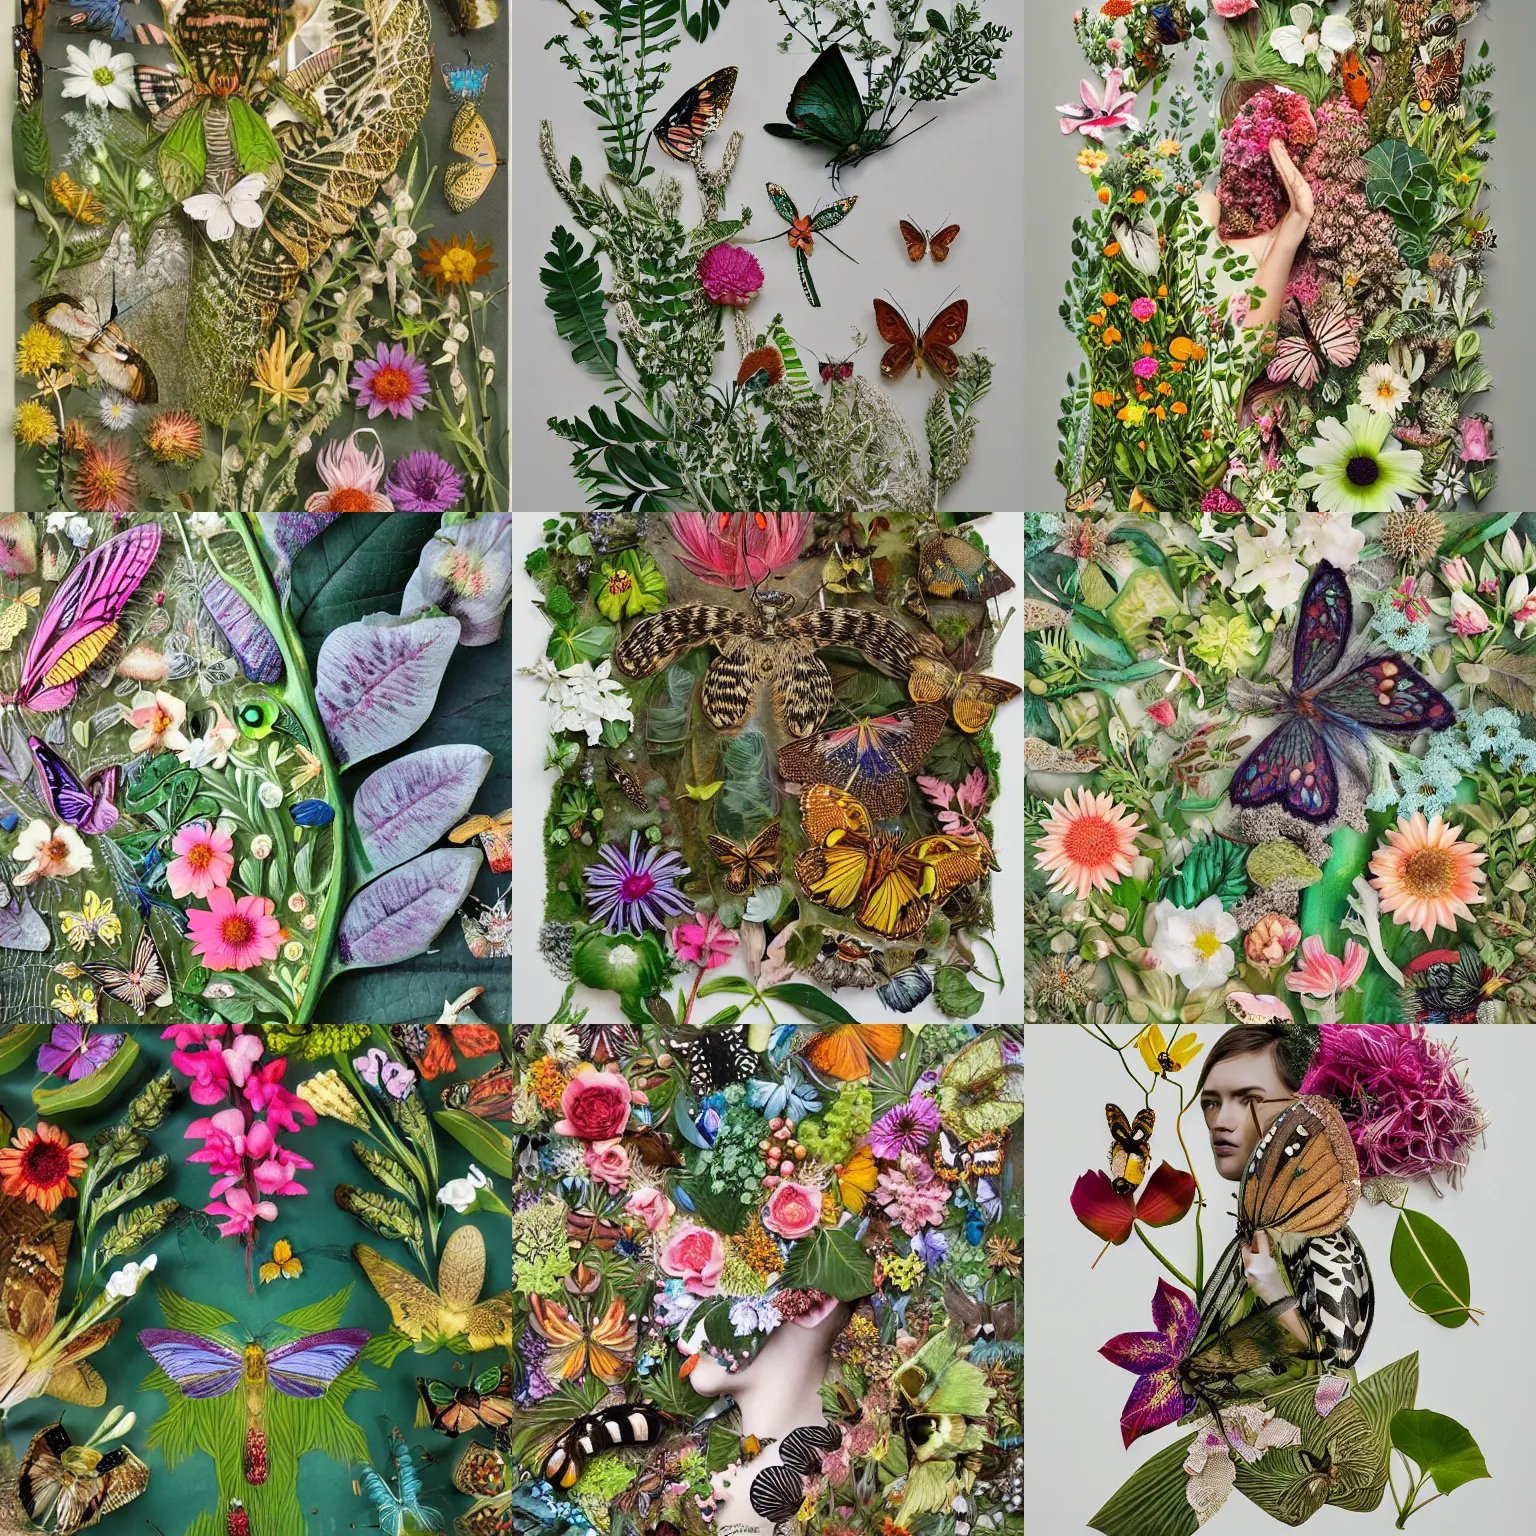 Prompt: hand cut images of flora and fauna come together in lush and intricate compositions, insects, flowers, foliage, captivating, mixed media